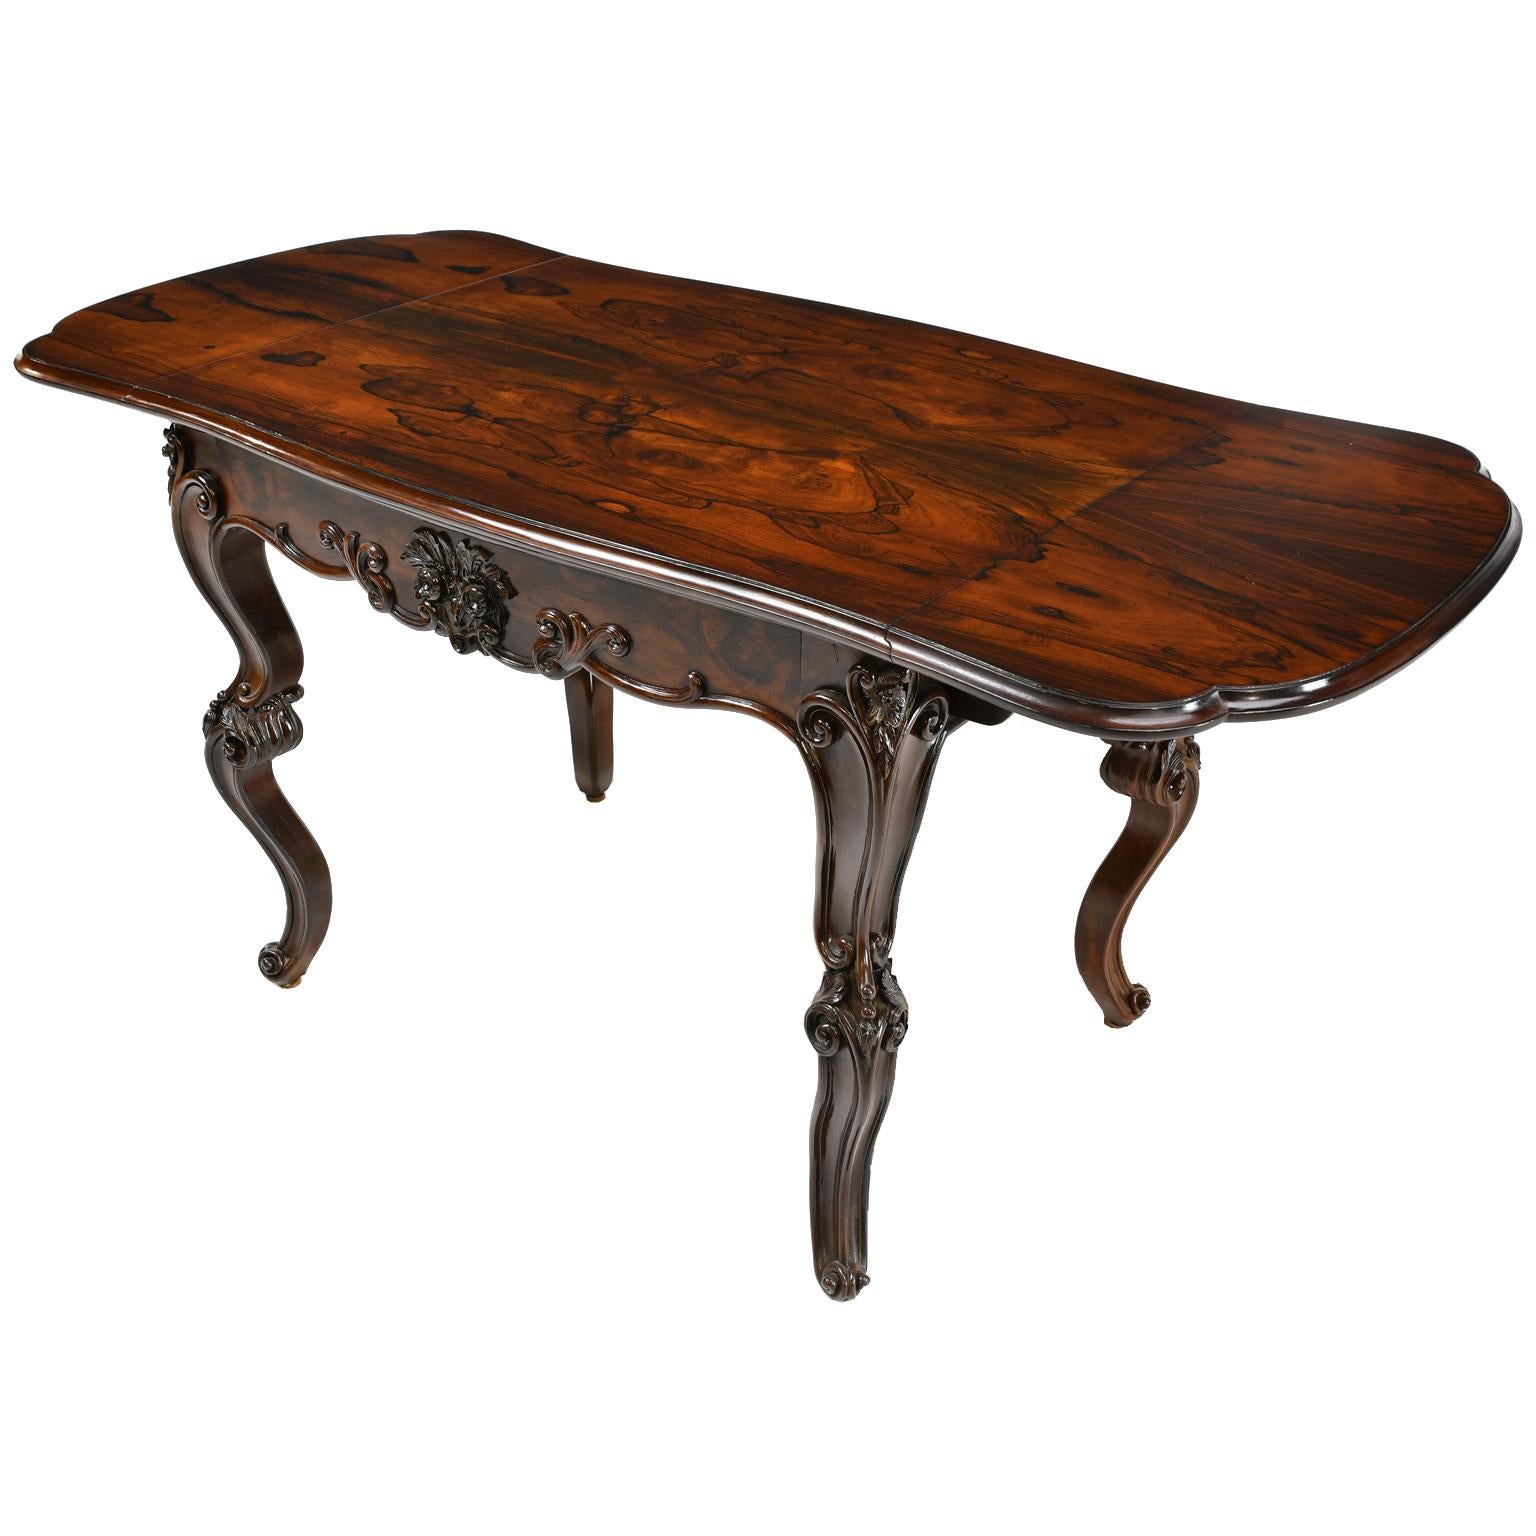 Rosewood American Rococo Revival Sofa Table or Writing Table NYC, circa 1840 In Good Condition For Sale In Miami, FL